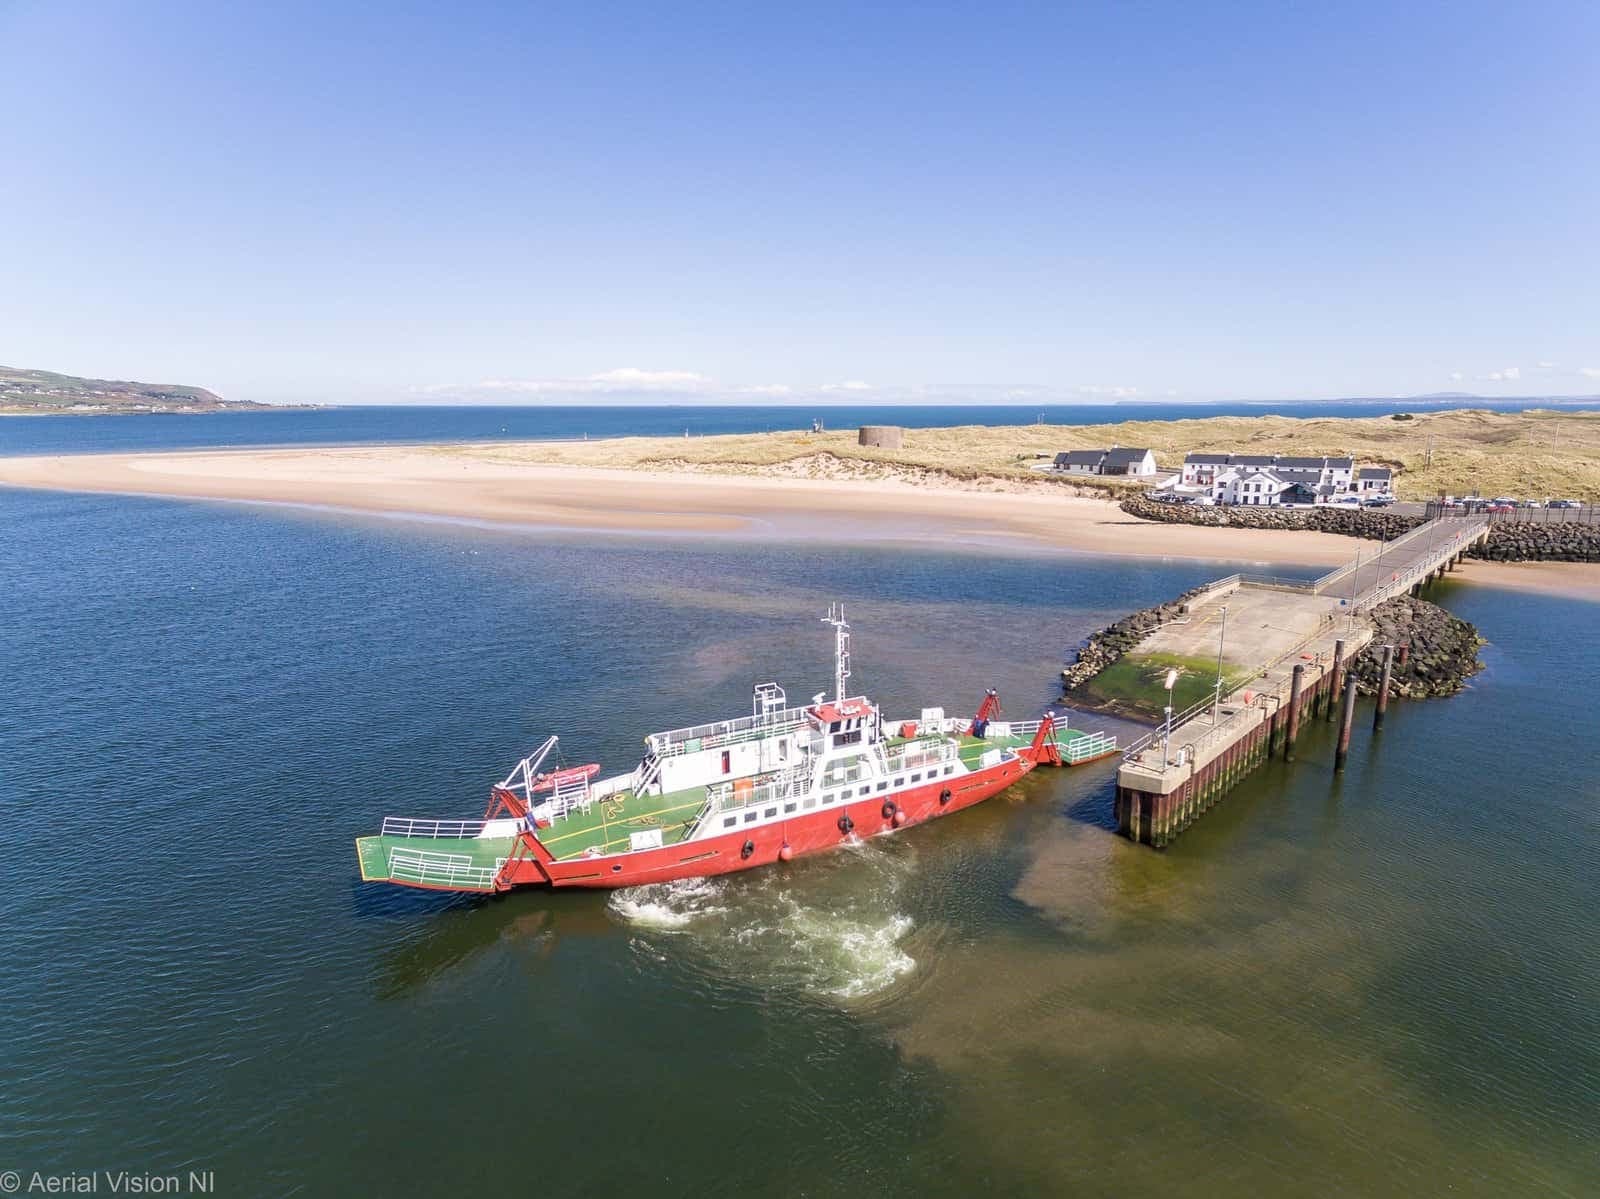 STRANGFORD conducting sea trials across Lough Foyle between Greencastle and Magilligan. The former Strangford Lough ferry will cover the service over the Early-May Bank Holiday period in the absence of the regular vessel, FRAXER MARINER. Copyright © Aerial Vision NI.